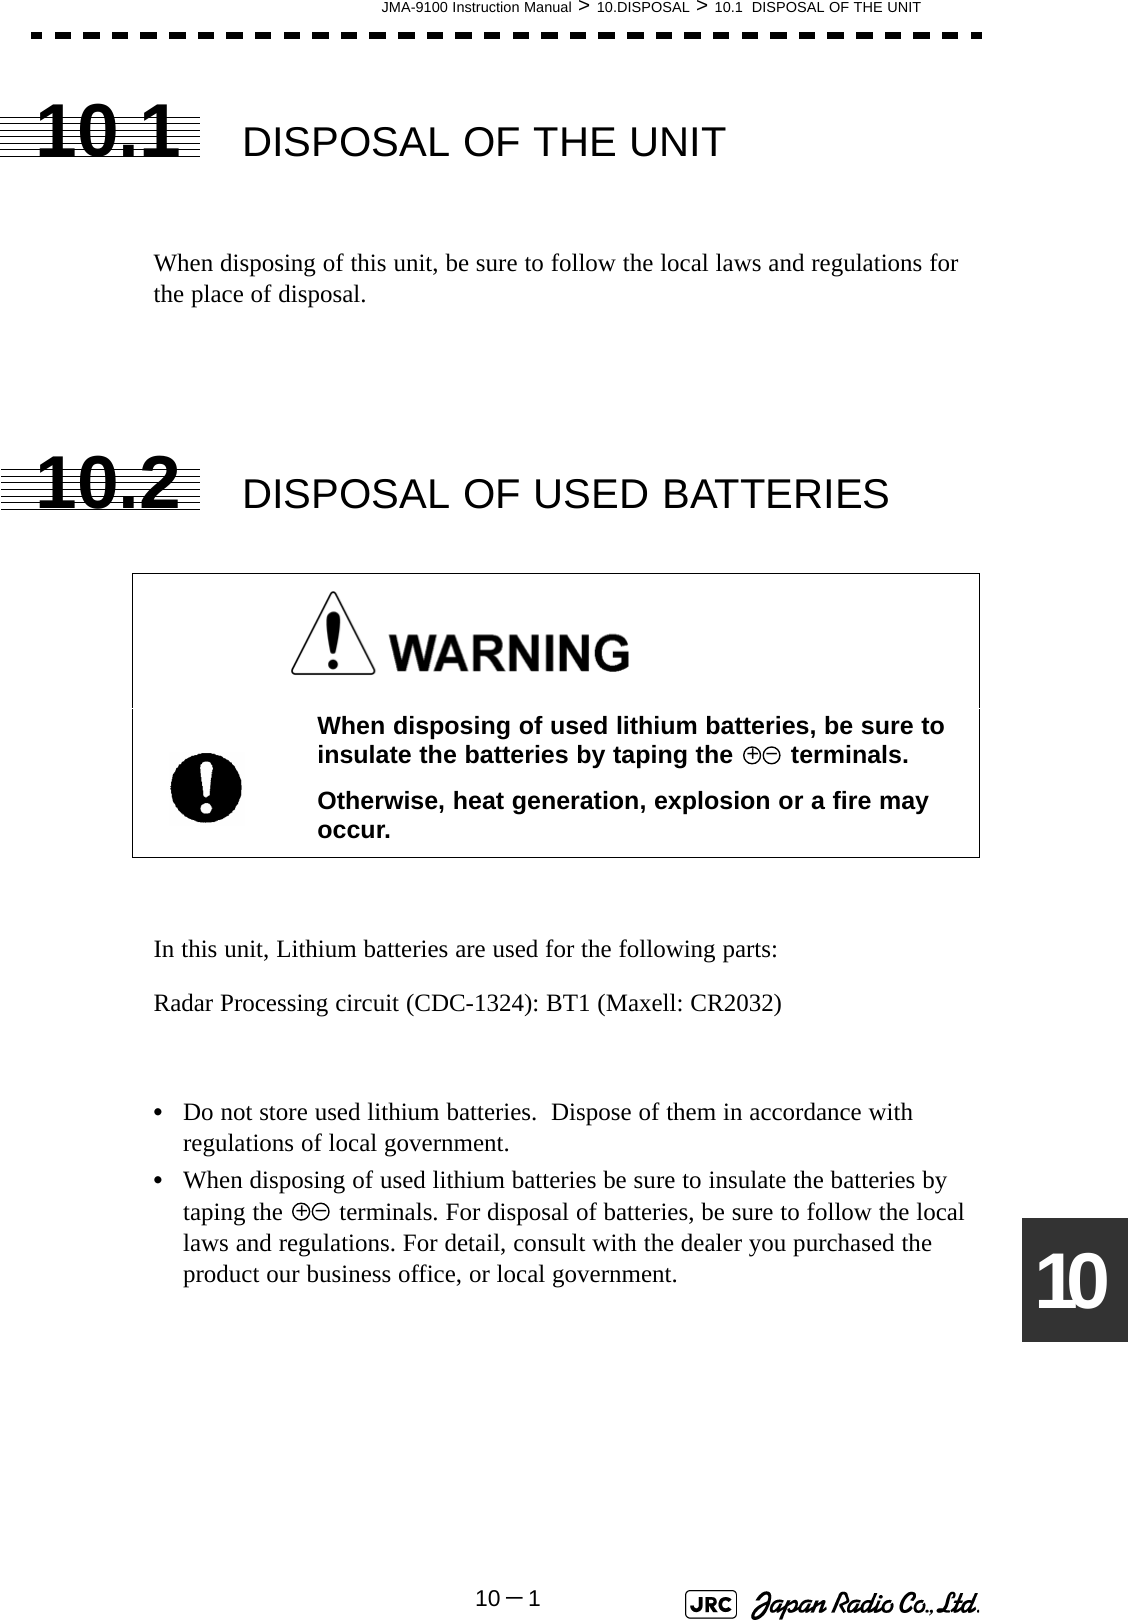 JMA-9100 Instruction Manual &gt; 10.DISPOSAL &gt; 10.1  DISPOSAL OF THE UNIT10－11010.1 DISPOSAL OF THE UNITWhen disposing of this unit, be sure to follow the local laws and regulations for the place of disposal. 10.2 DISPOSAL OF USED BATTERIESIn this unit, Lithium batteries are used for the following parts:Radar Processing circuit (CDC-1324): BT1 (Maxell: CR2032)•Do not store used lithium batteries.  Dispose of them in accordance with regulations of local government.•When disposing of used lithium batteries be sure to insulate the batteries by taping the   terminals. For disposal of batteries, be sure to follow the local laws and regulations. For detail, consult with the dealer you purchased the product our business office, or local government. When disposing of used lithium batteries, be sure to insulate the batteries by taping the   terminals.Otherwise, heat generation, explosion or a fire may occur.+ -+ -